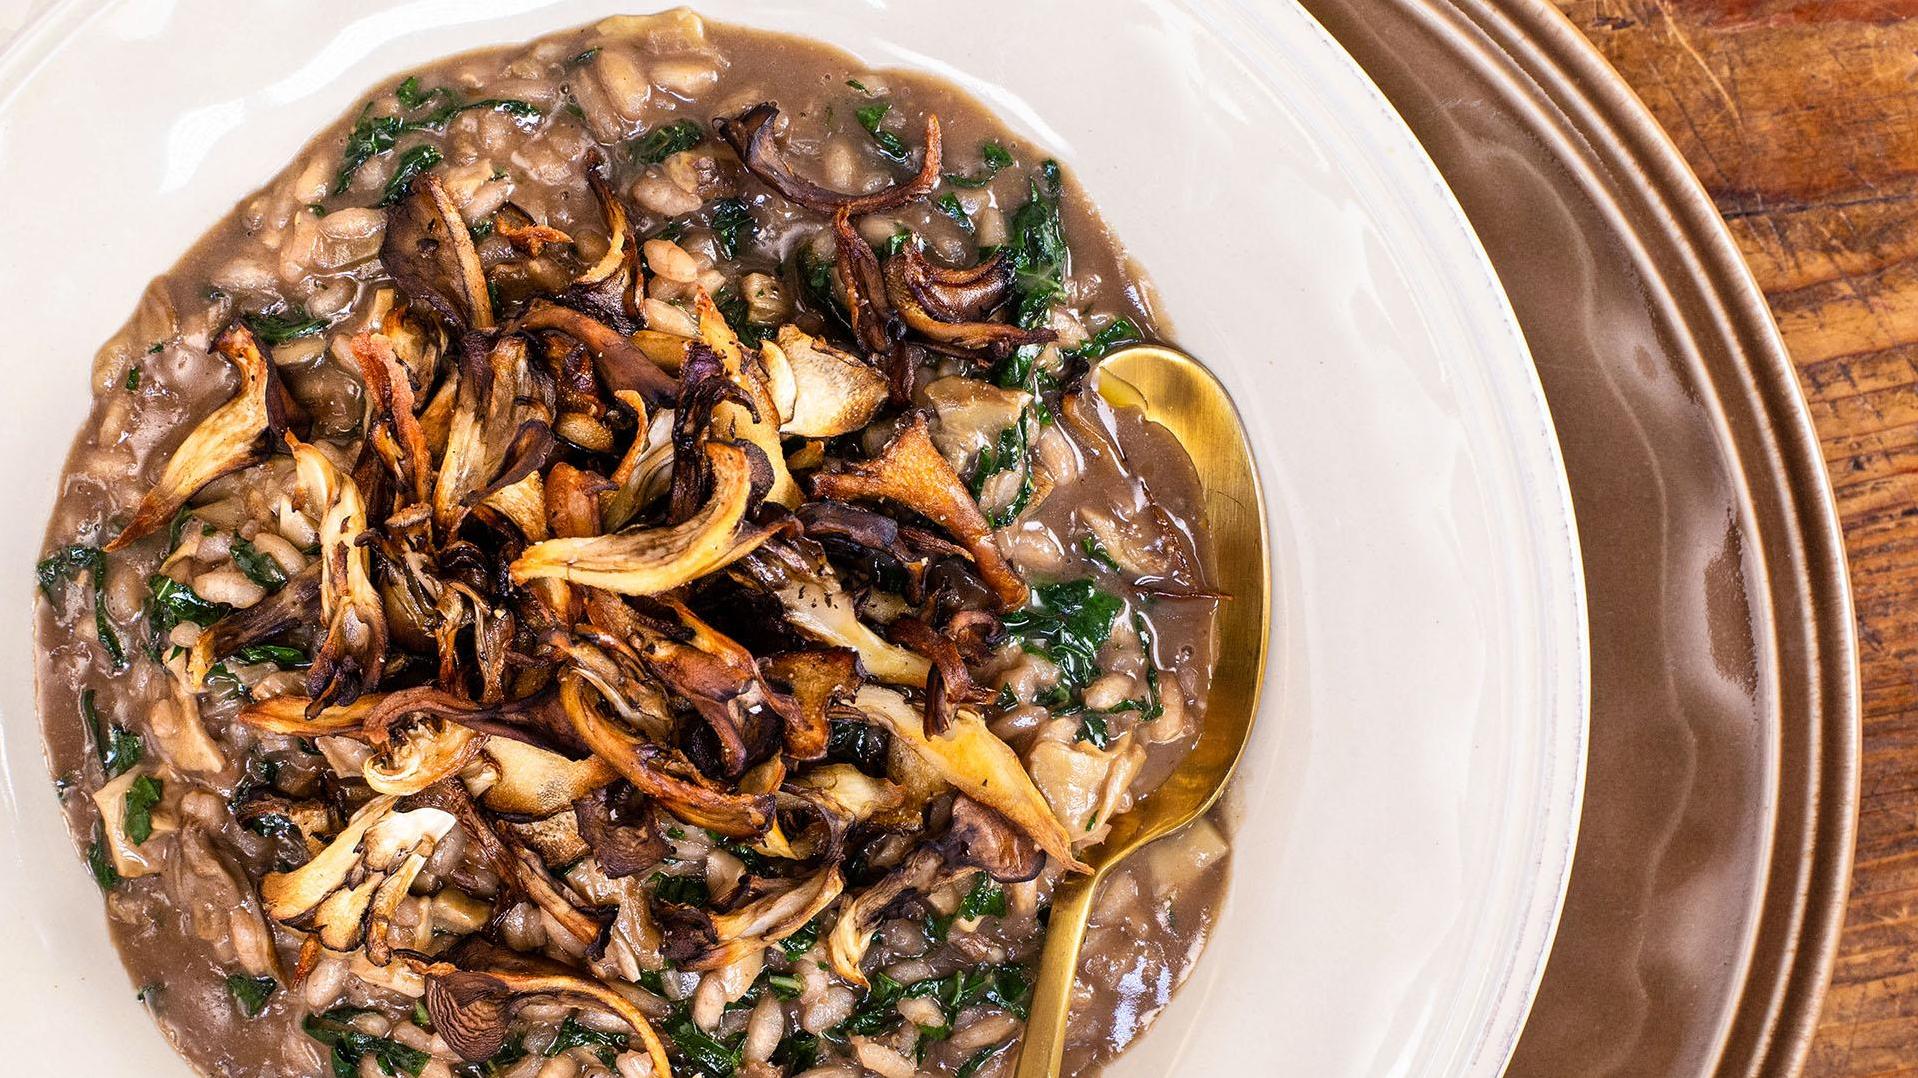  Get ready for a flavorful adventure with our mushroom and red wine risotto recipe!